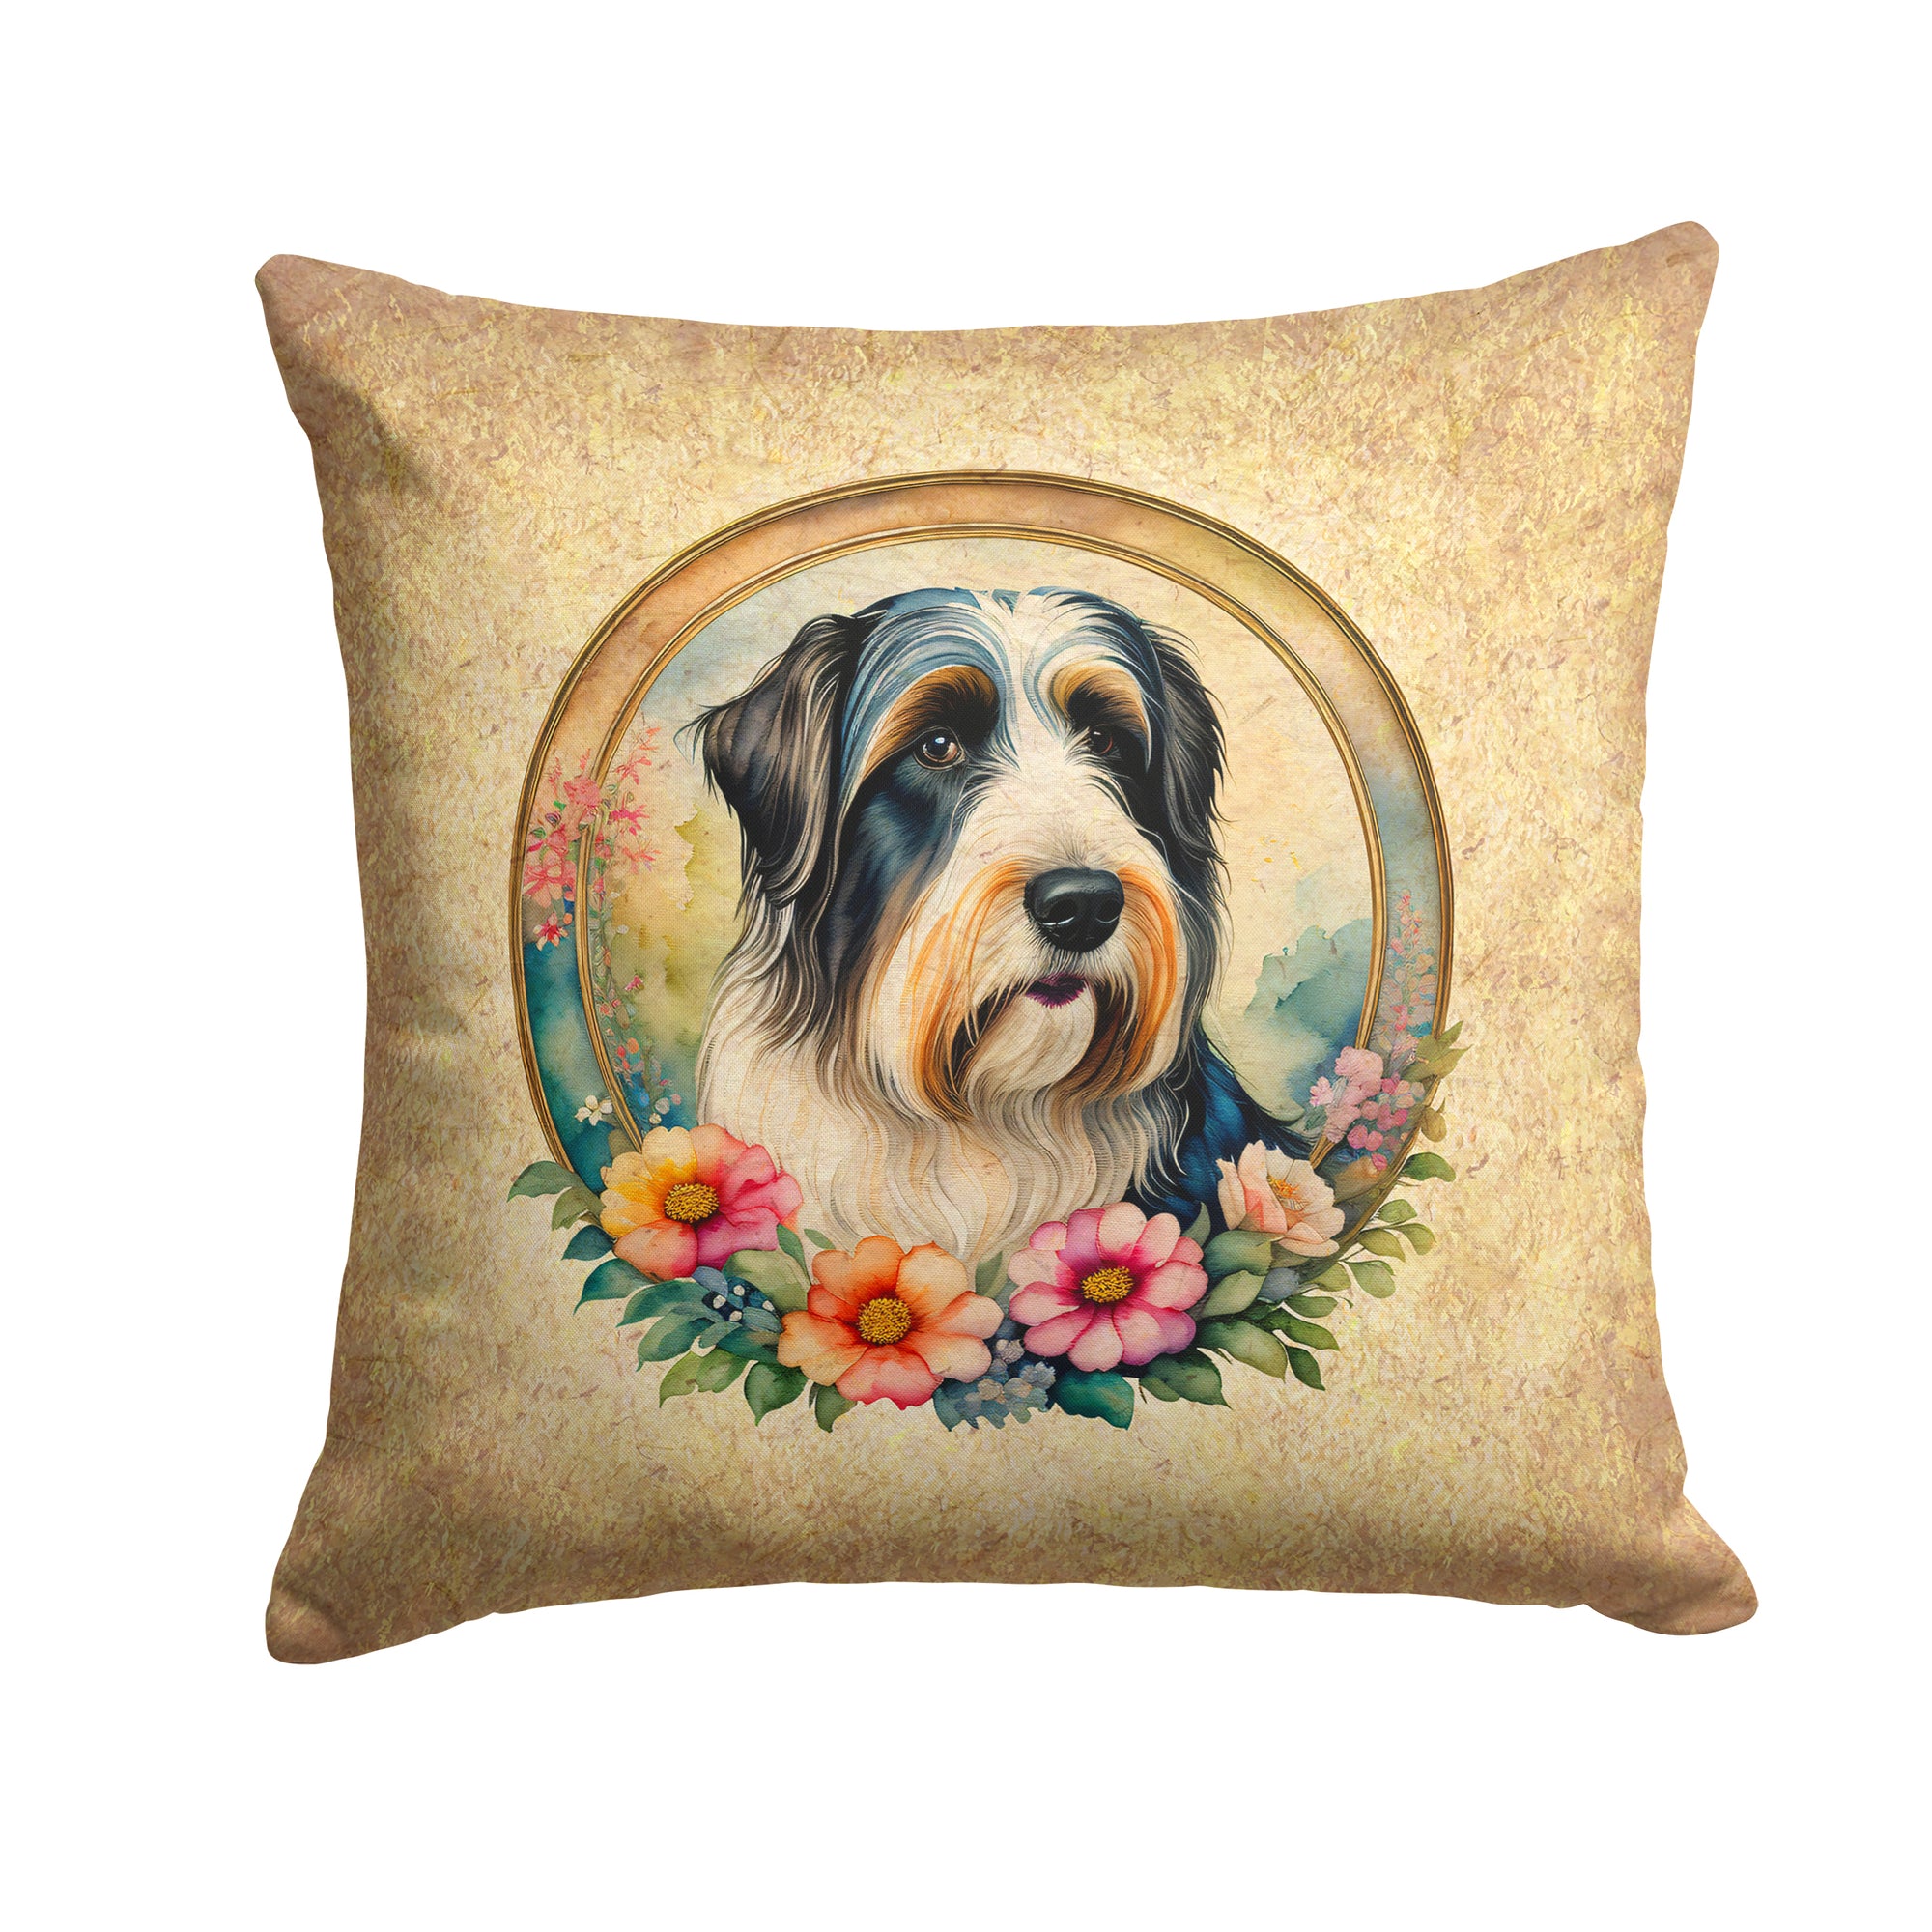 Buy this Bearded Collie and Flowers Fabric Decorative Pillow